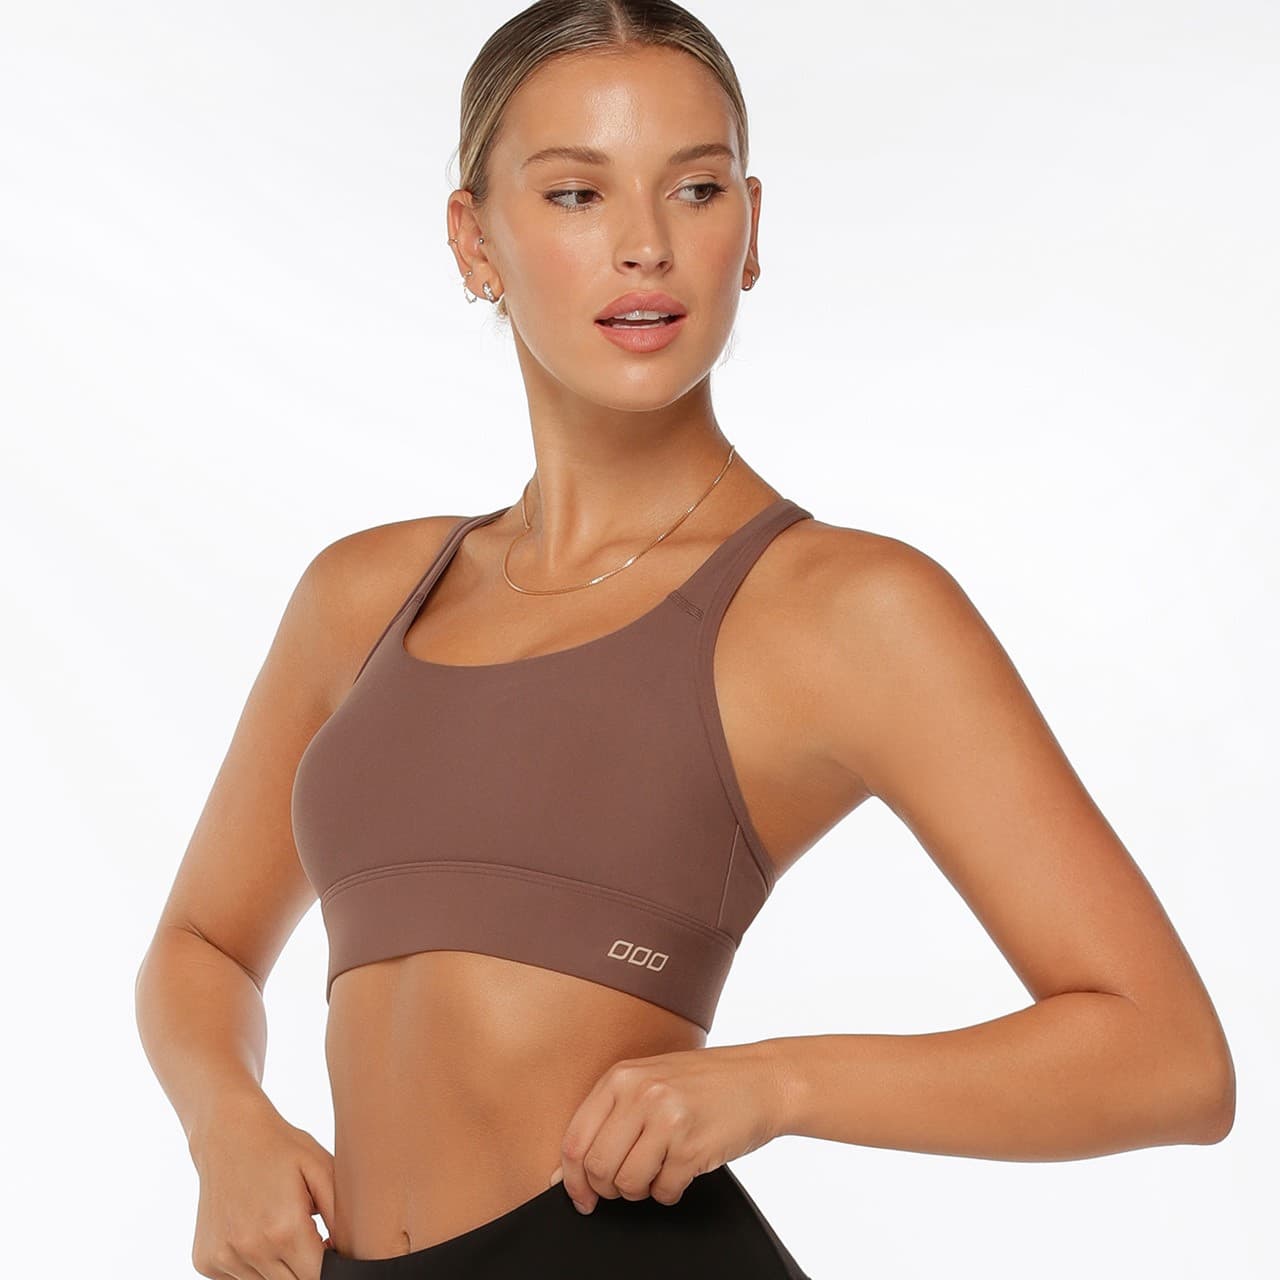 THE ONLY BRA YOU'LL EVER NEED! 😍 The Lorna Jane Compress & Compact Sports  Bra 